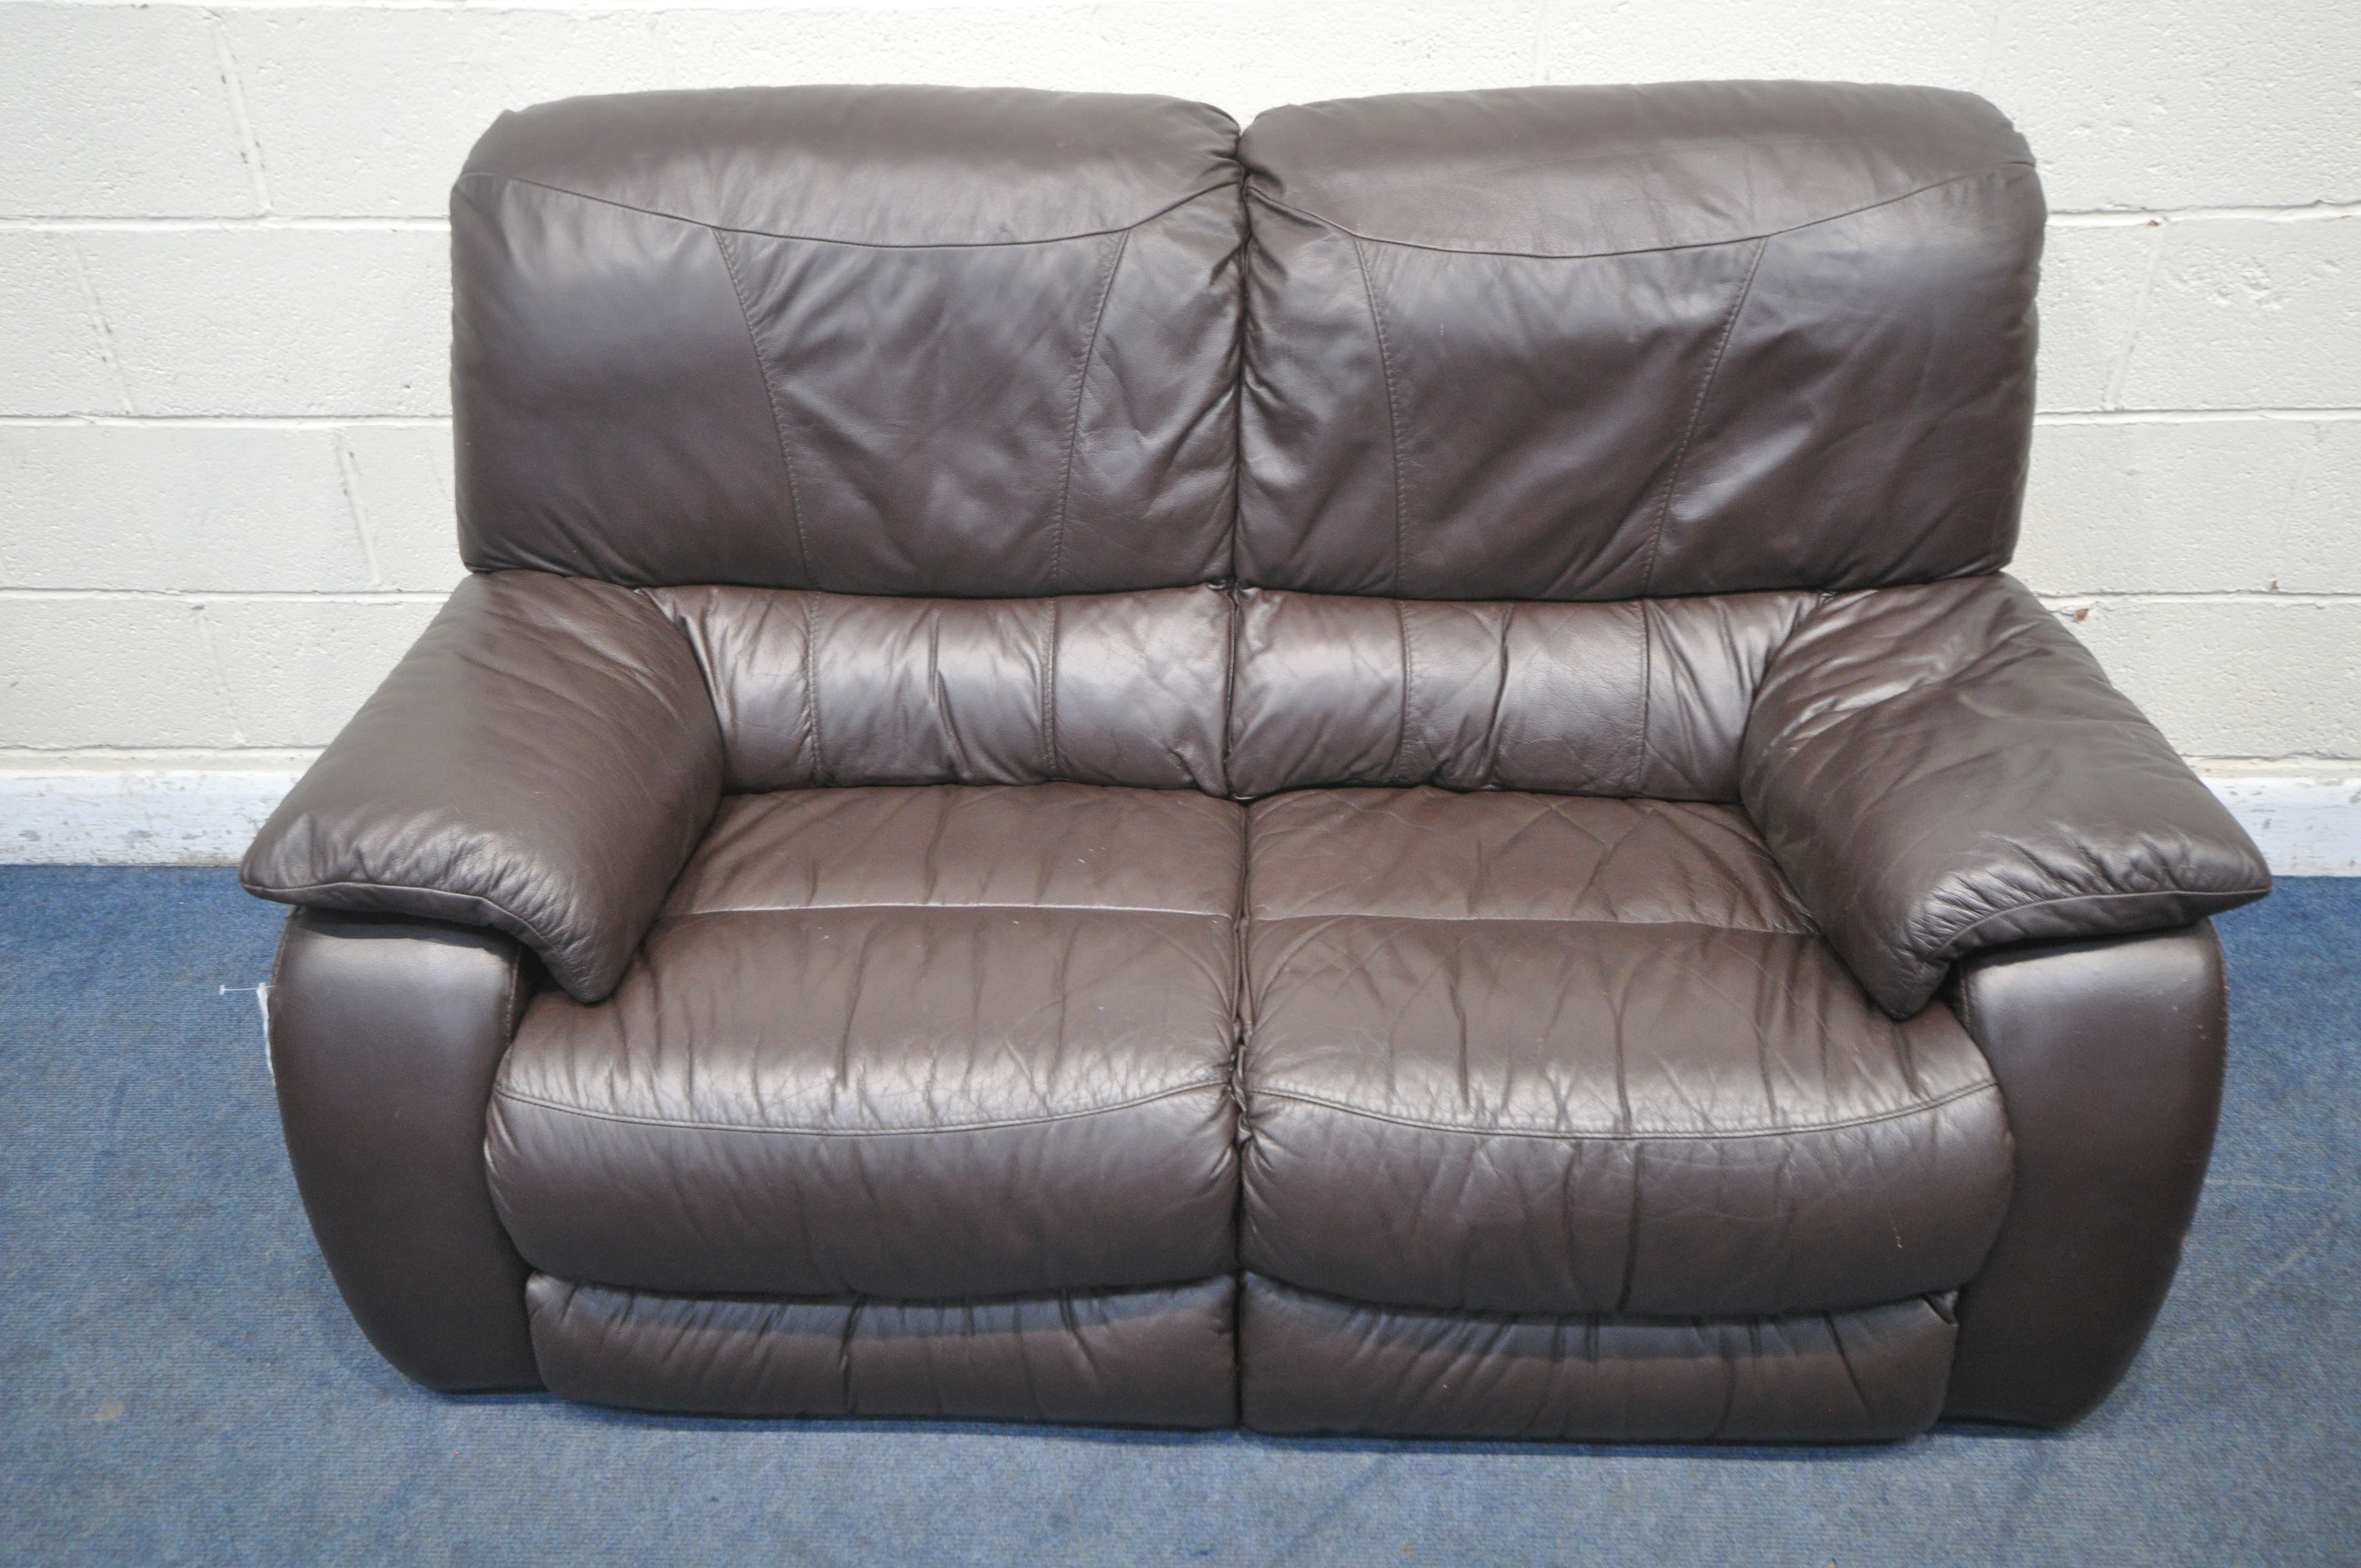 A BROWN LEATHER UPHOLSTERED TWO SEATER SOFA, length 162cm x depth 91cm x height 97cm (condition